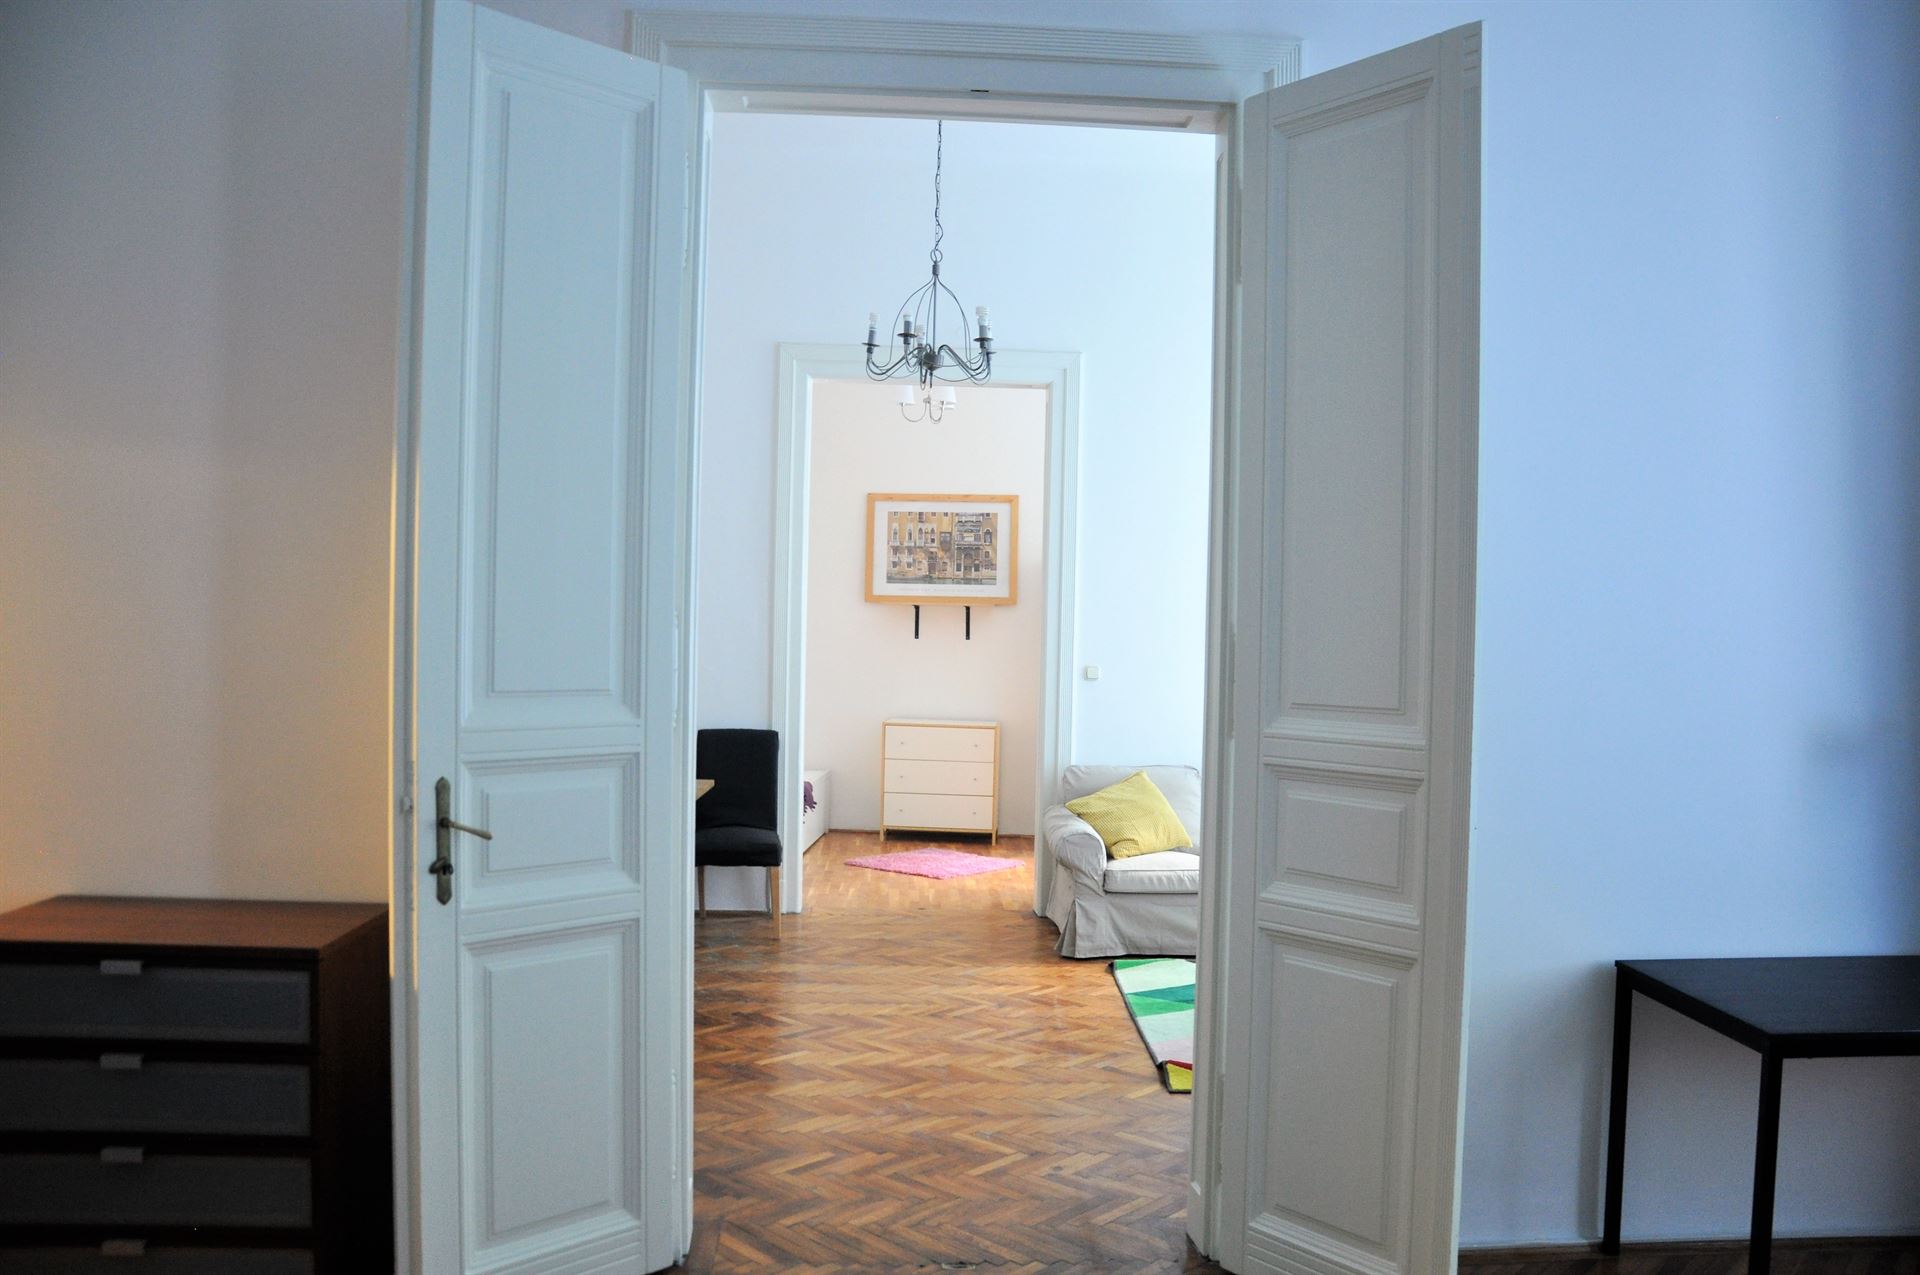 budapest-apartment-for-sale-near-kalvin-district-5-investment-property-for-sale-real-estate-budapest-downtown8